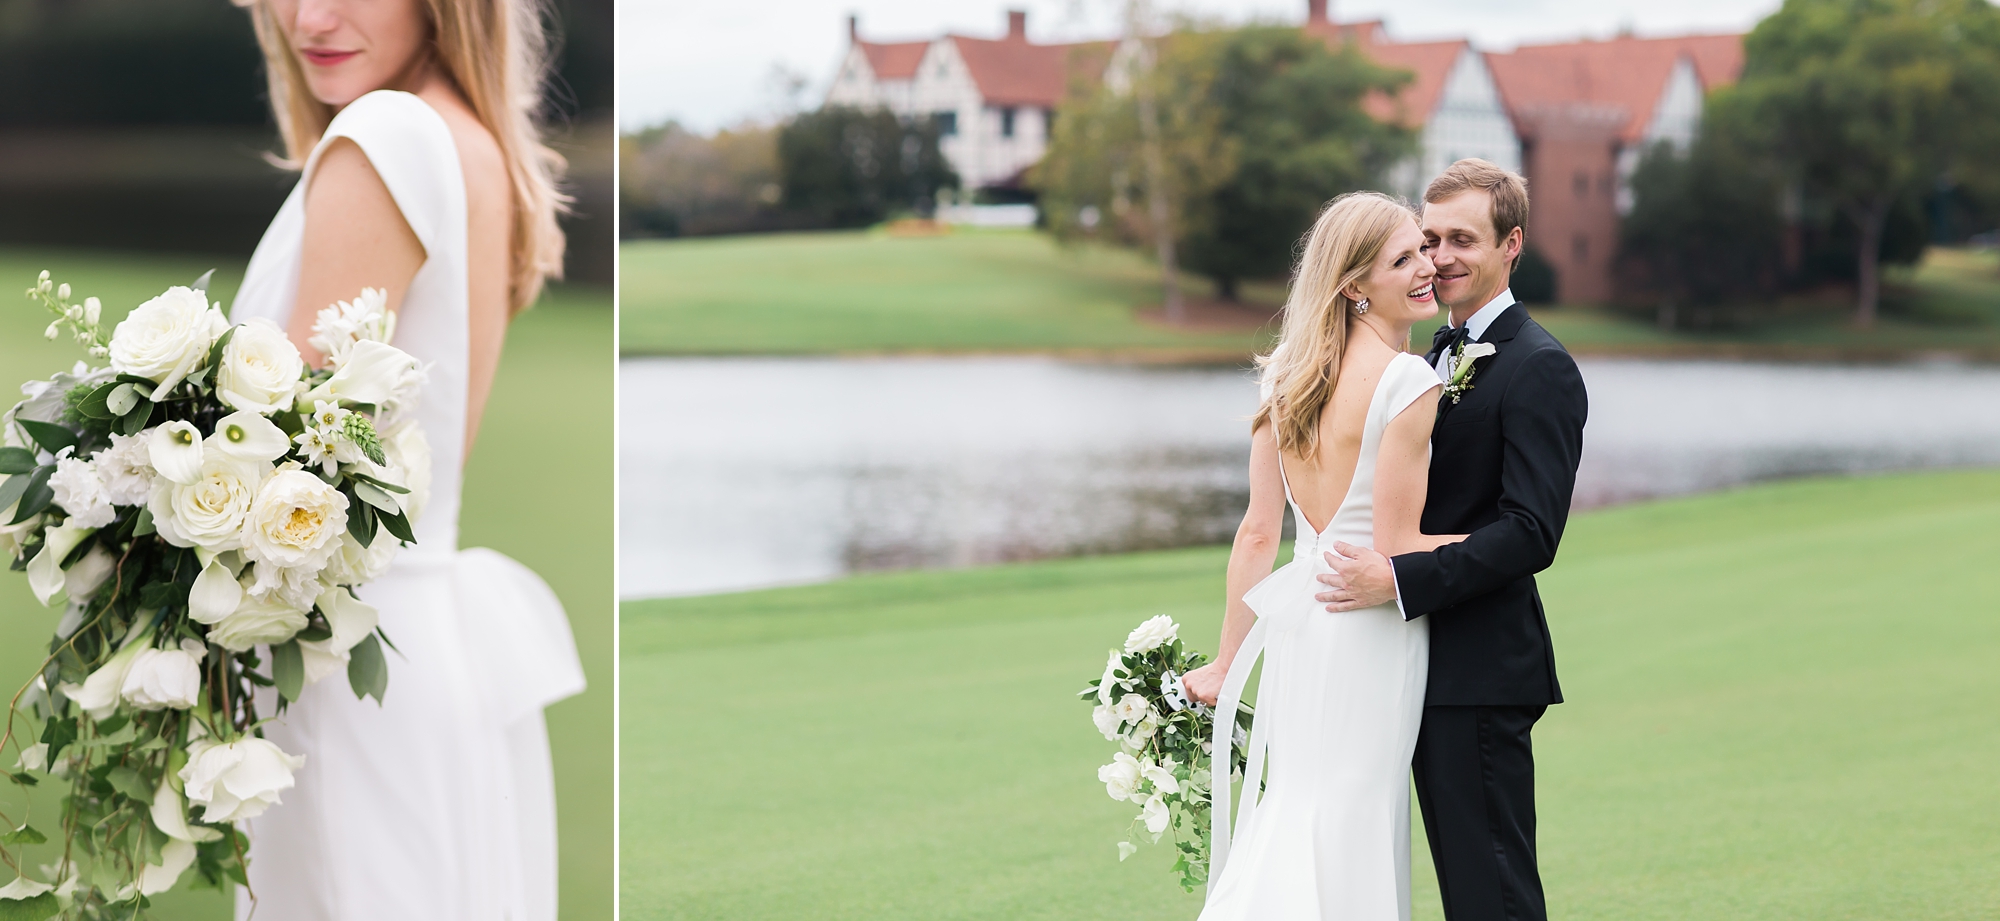 Bride and Groom Portraits at East Lake Golf Club by Top Atlanta Wedding Photographer Leigh Wolfe Photography